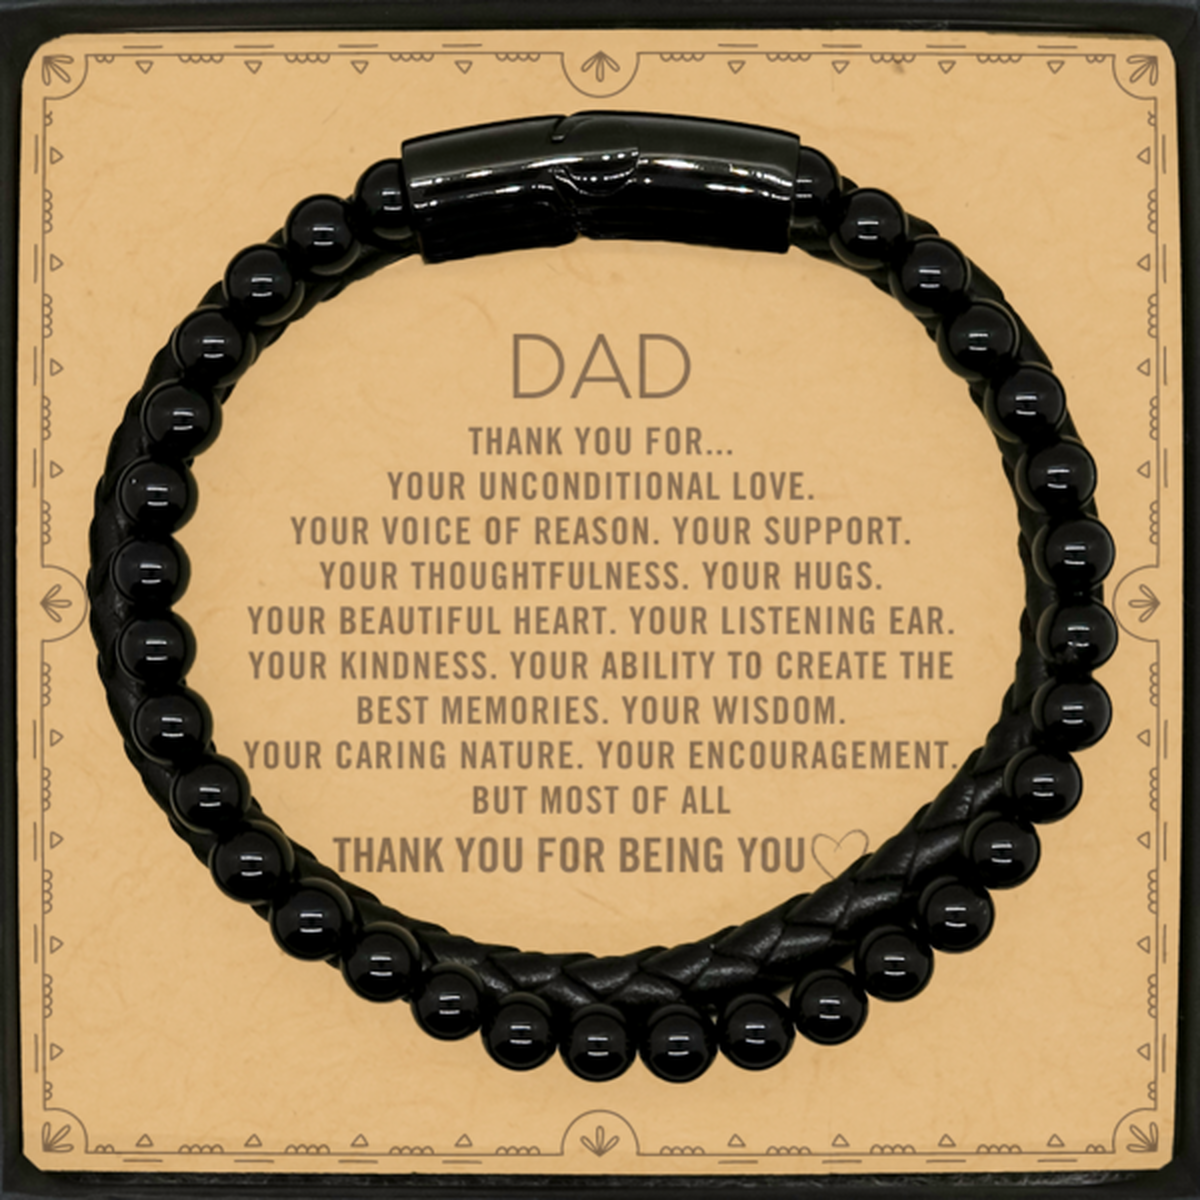 Dad Stone Leather Bracelets Custom, Message Card Gifts For Dad Christmas Graduation Birthday Gifts for Men Women Dad Thank you for Your unconditional love